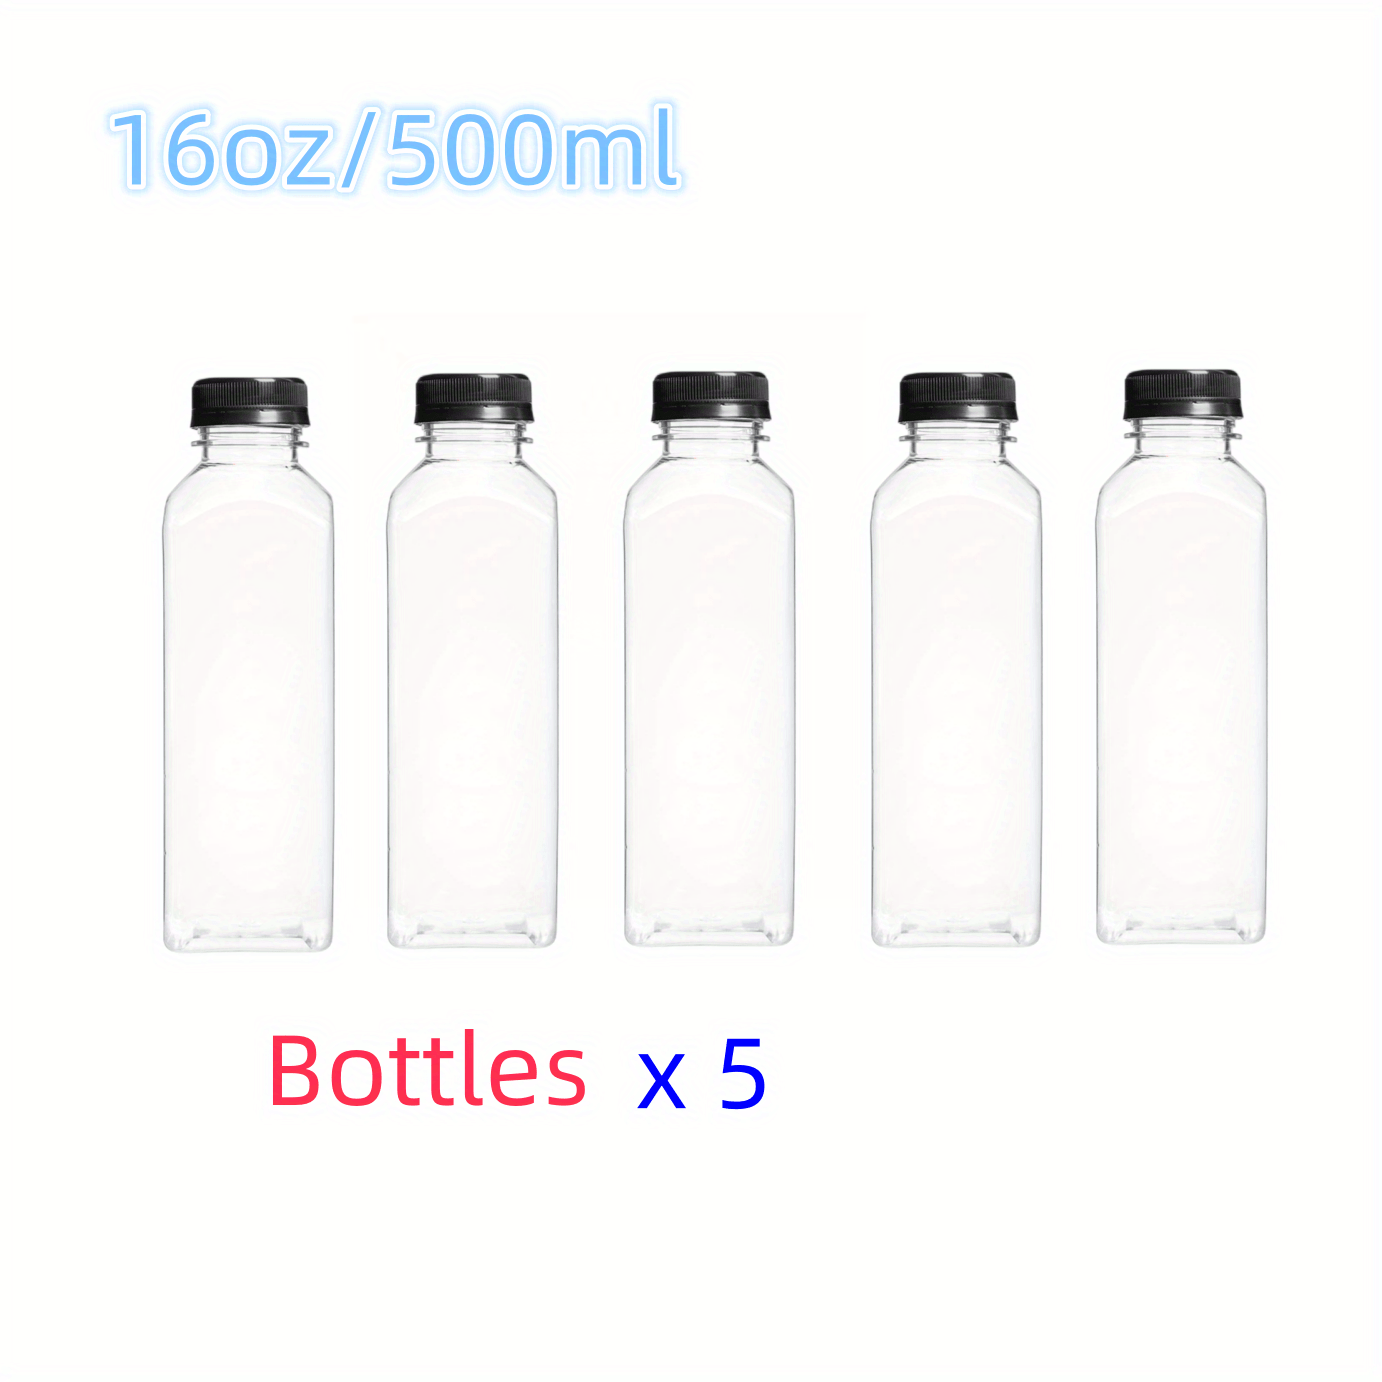 4pcs Milk Containers for Refrigerator Milk Jugs Glass Milk Bottles with  Lids 250ml